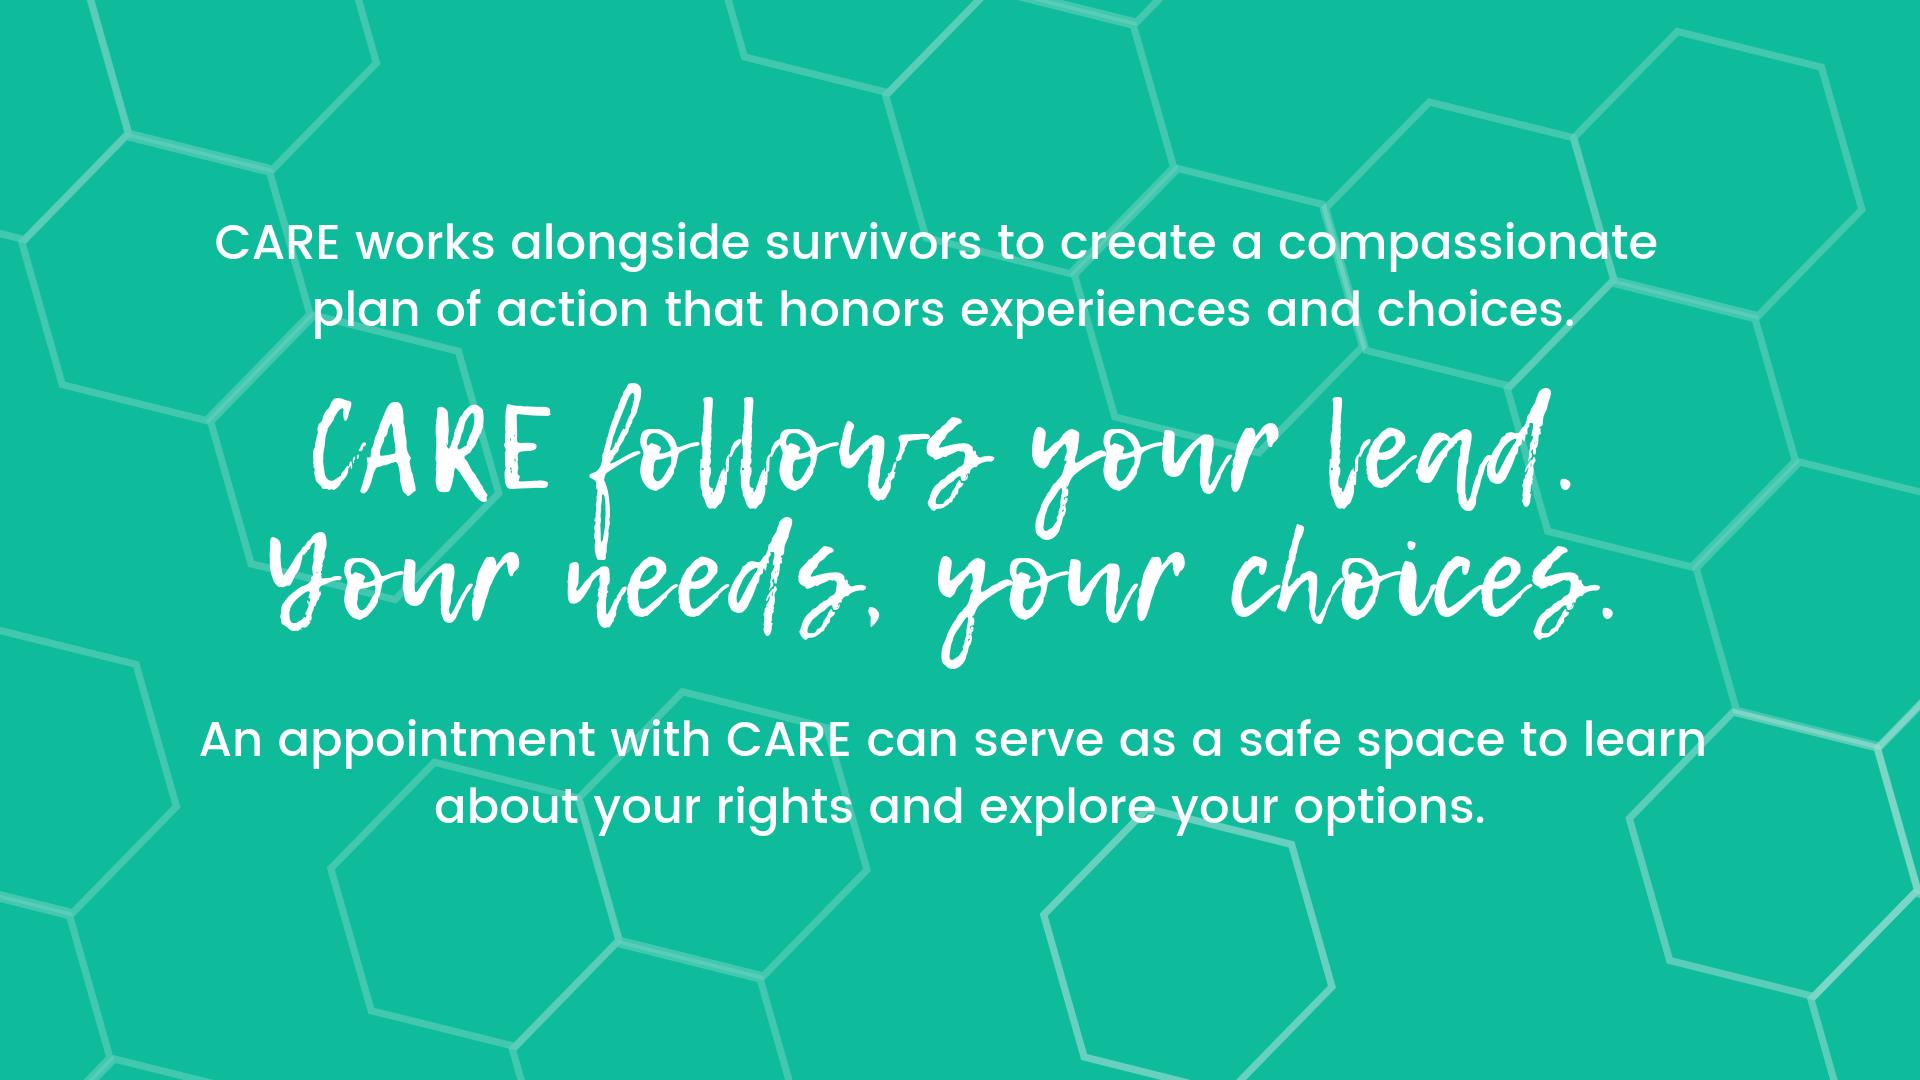 CARE follows your lead. An appointment with CARE can serve as a safe space to learn about your rights and explore your options.